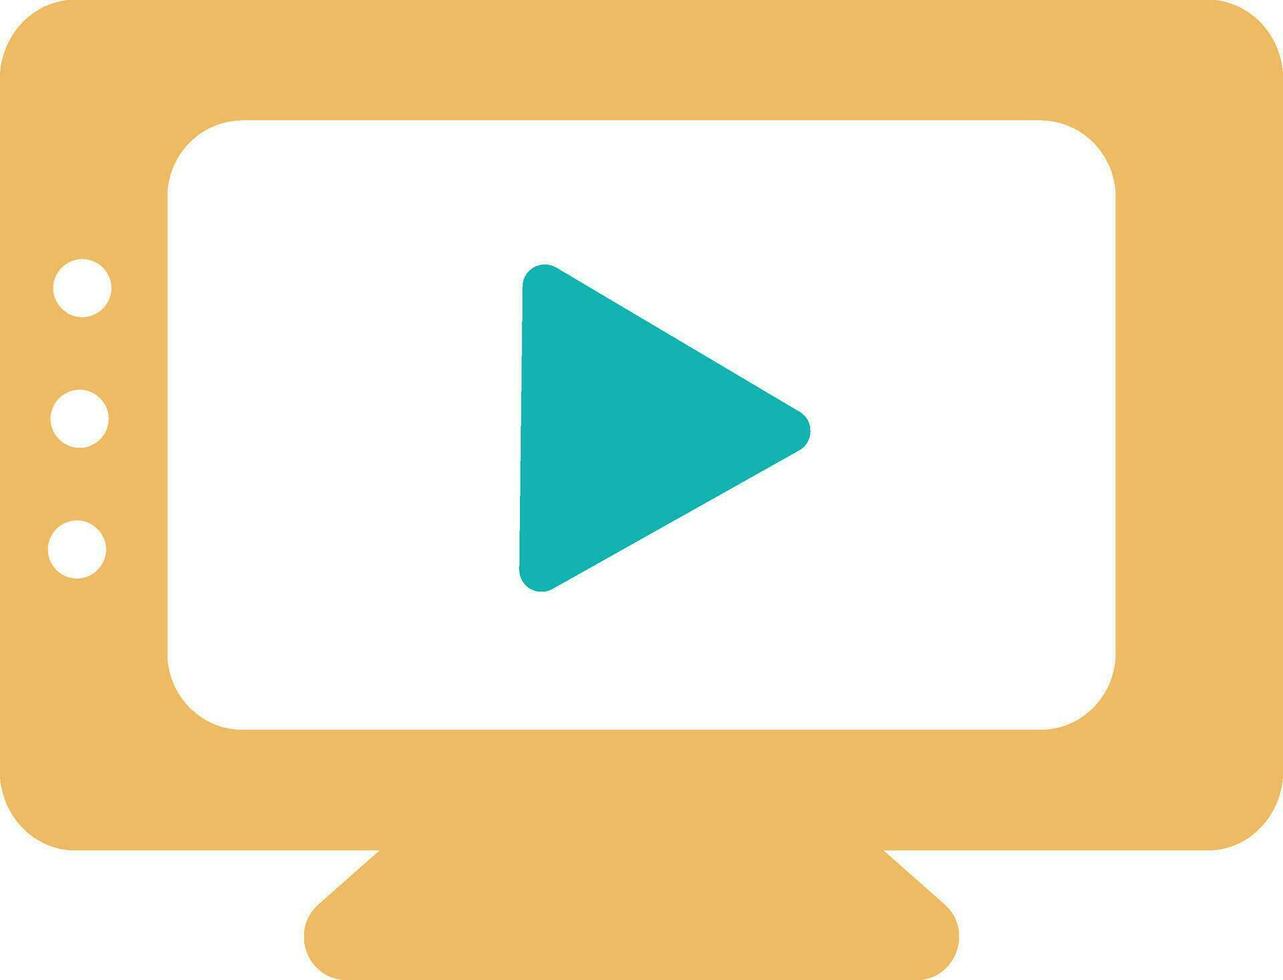 Video player yellow and sky blue icon in flat style. vector